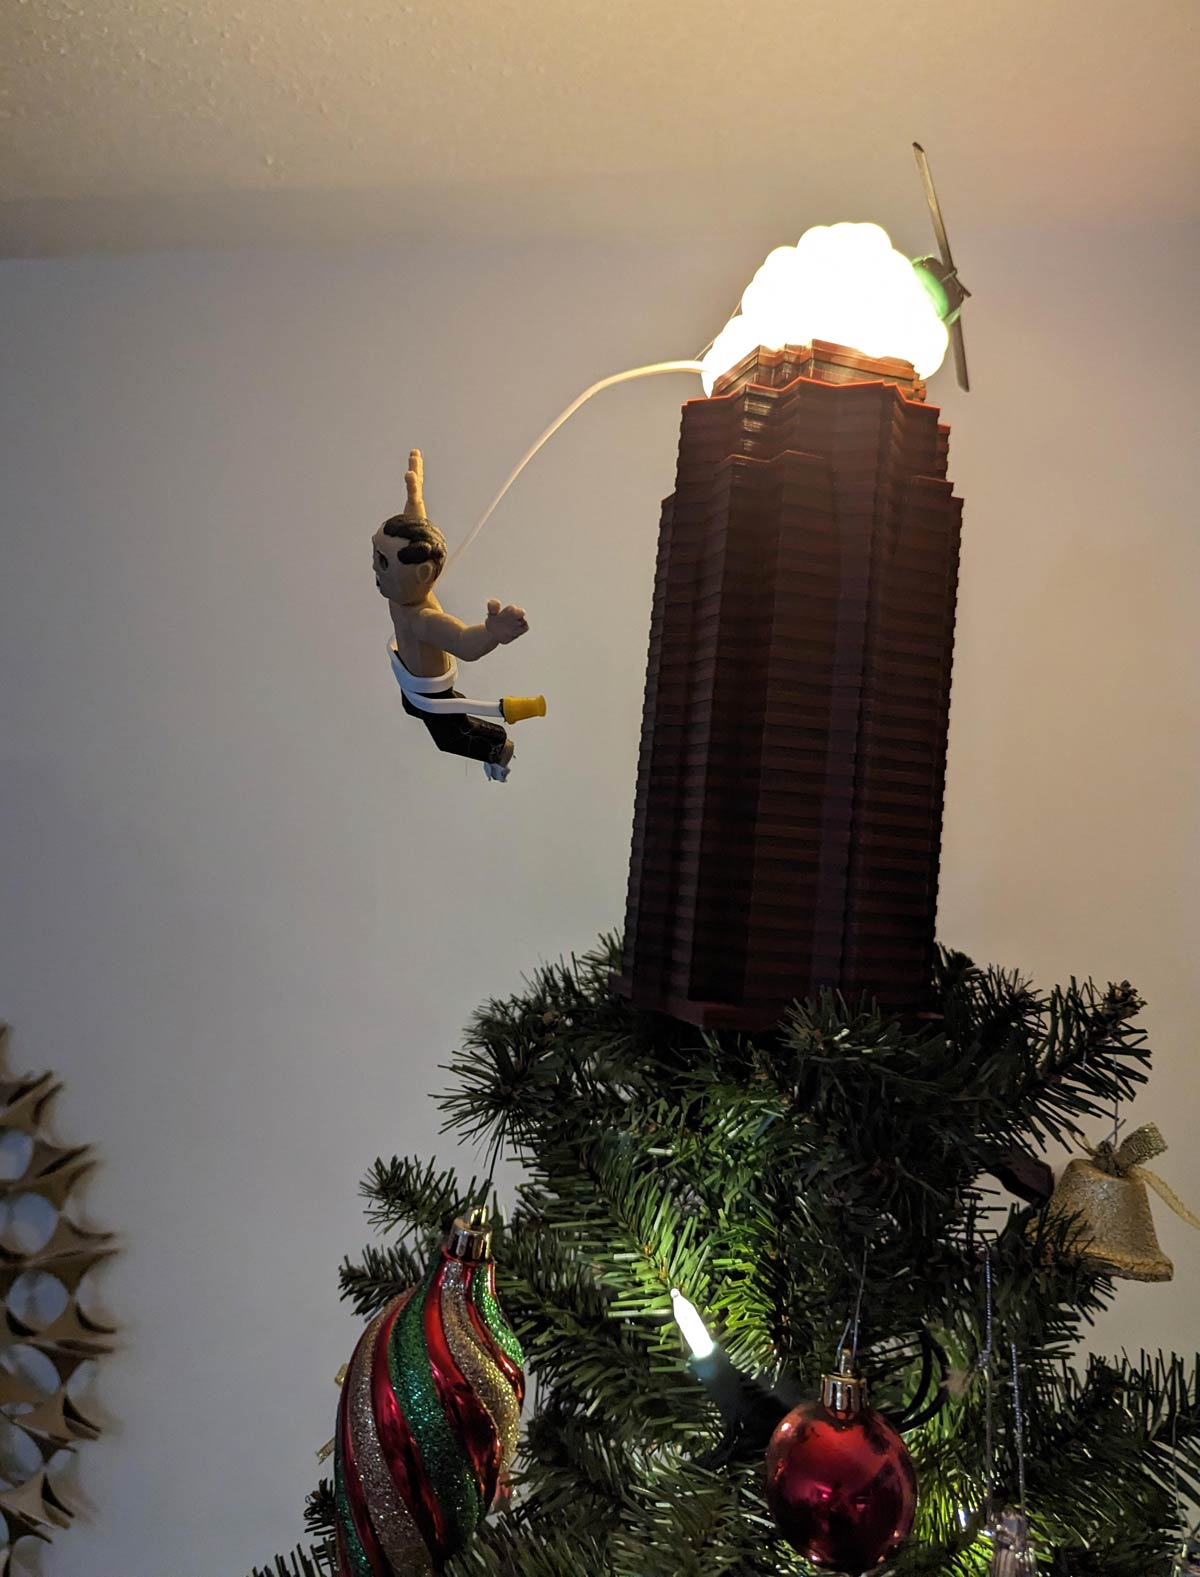 When no other tree topper will do